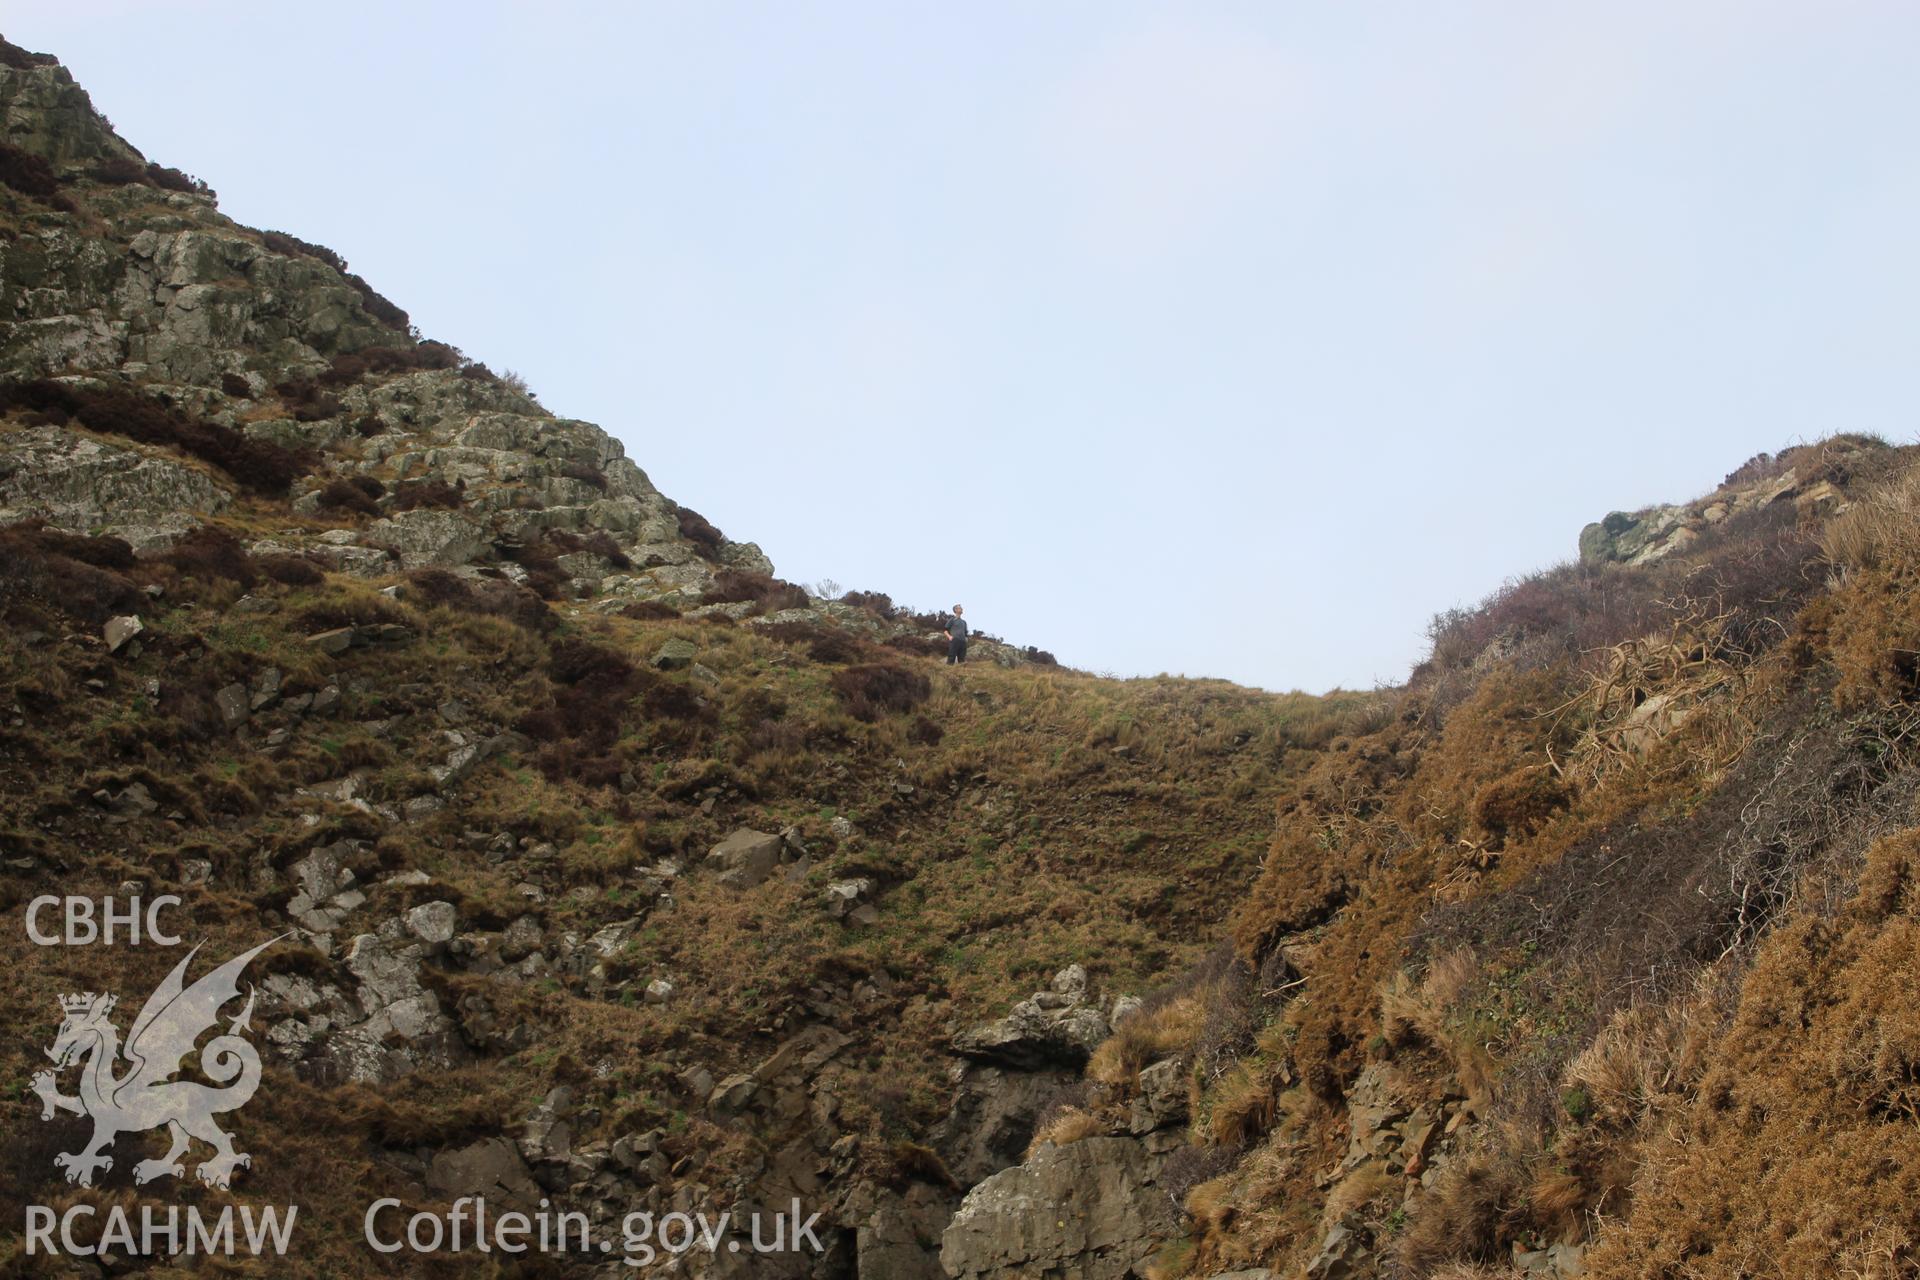 PHOTO SURVEY OF DINAS MAWR, LLANWNDA, PROMONTORY FORT, VIEW OF EROSION ON PROMONTORY NECK FROM SOUTH, WITH FIGURE FOR SCALE